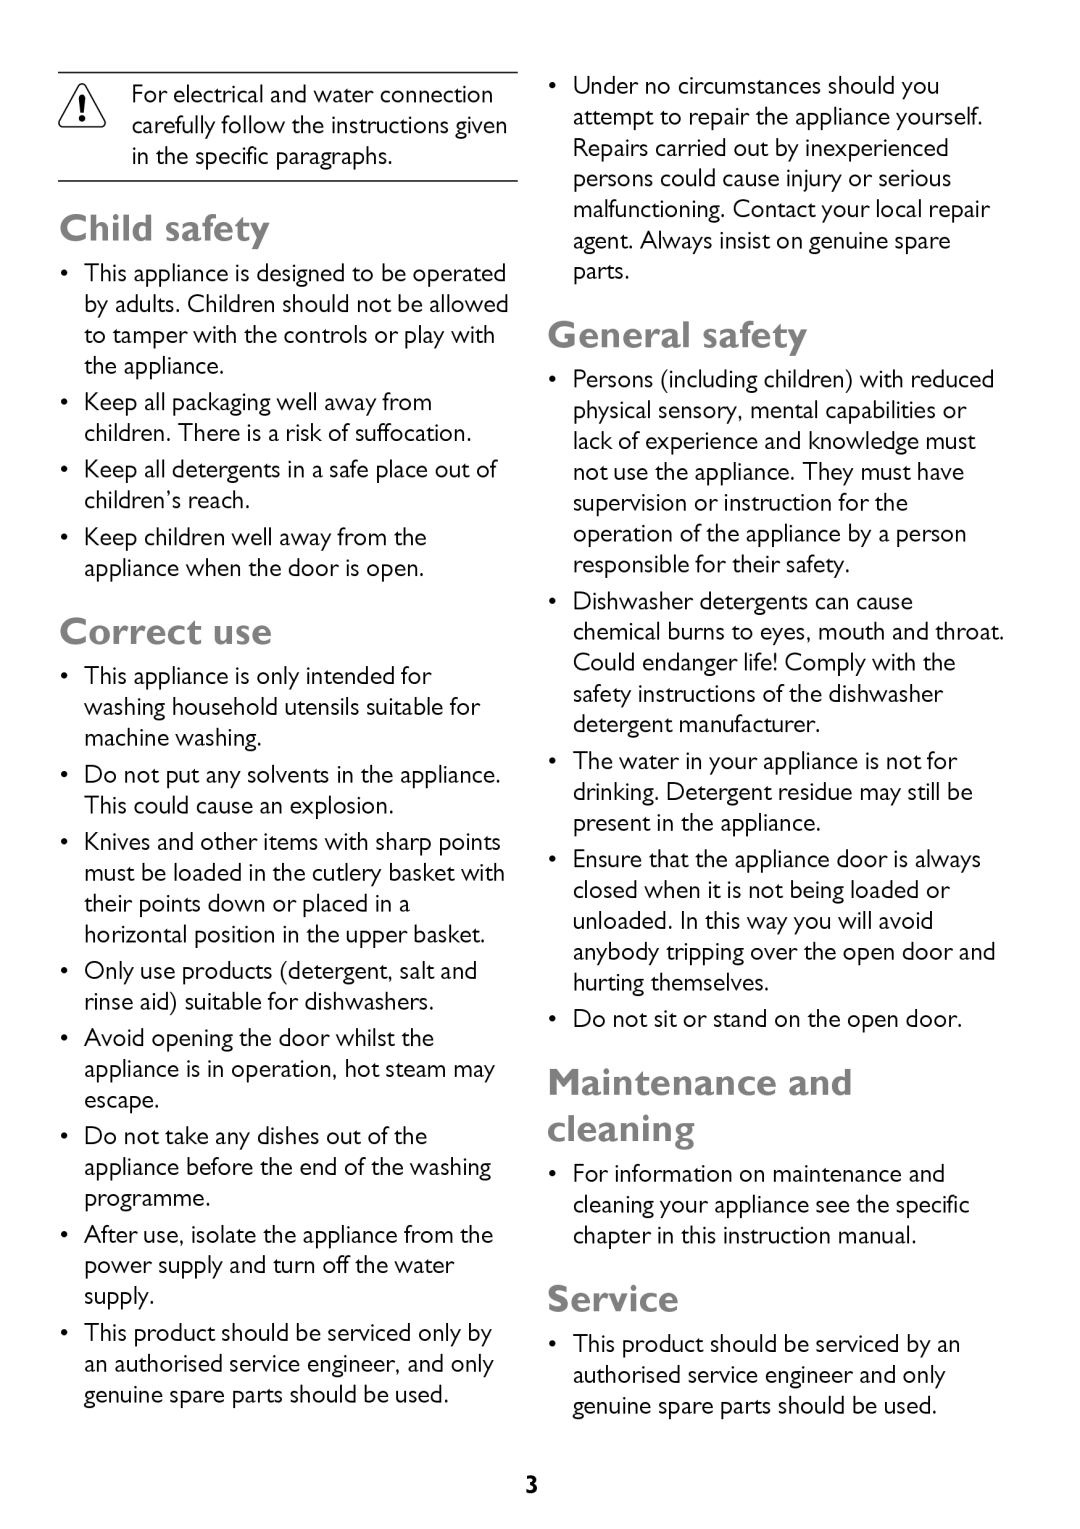 John Lewis JLDW 1221 instruction manual Child safety, Correct use, General safety, Maintenance and cleaning, Service 